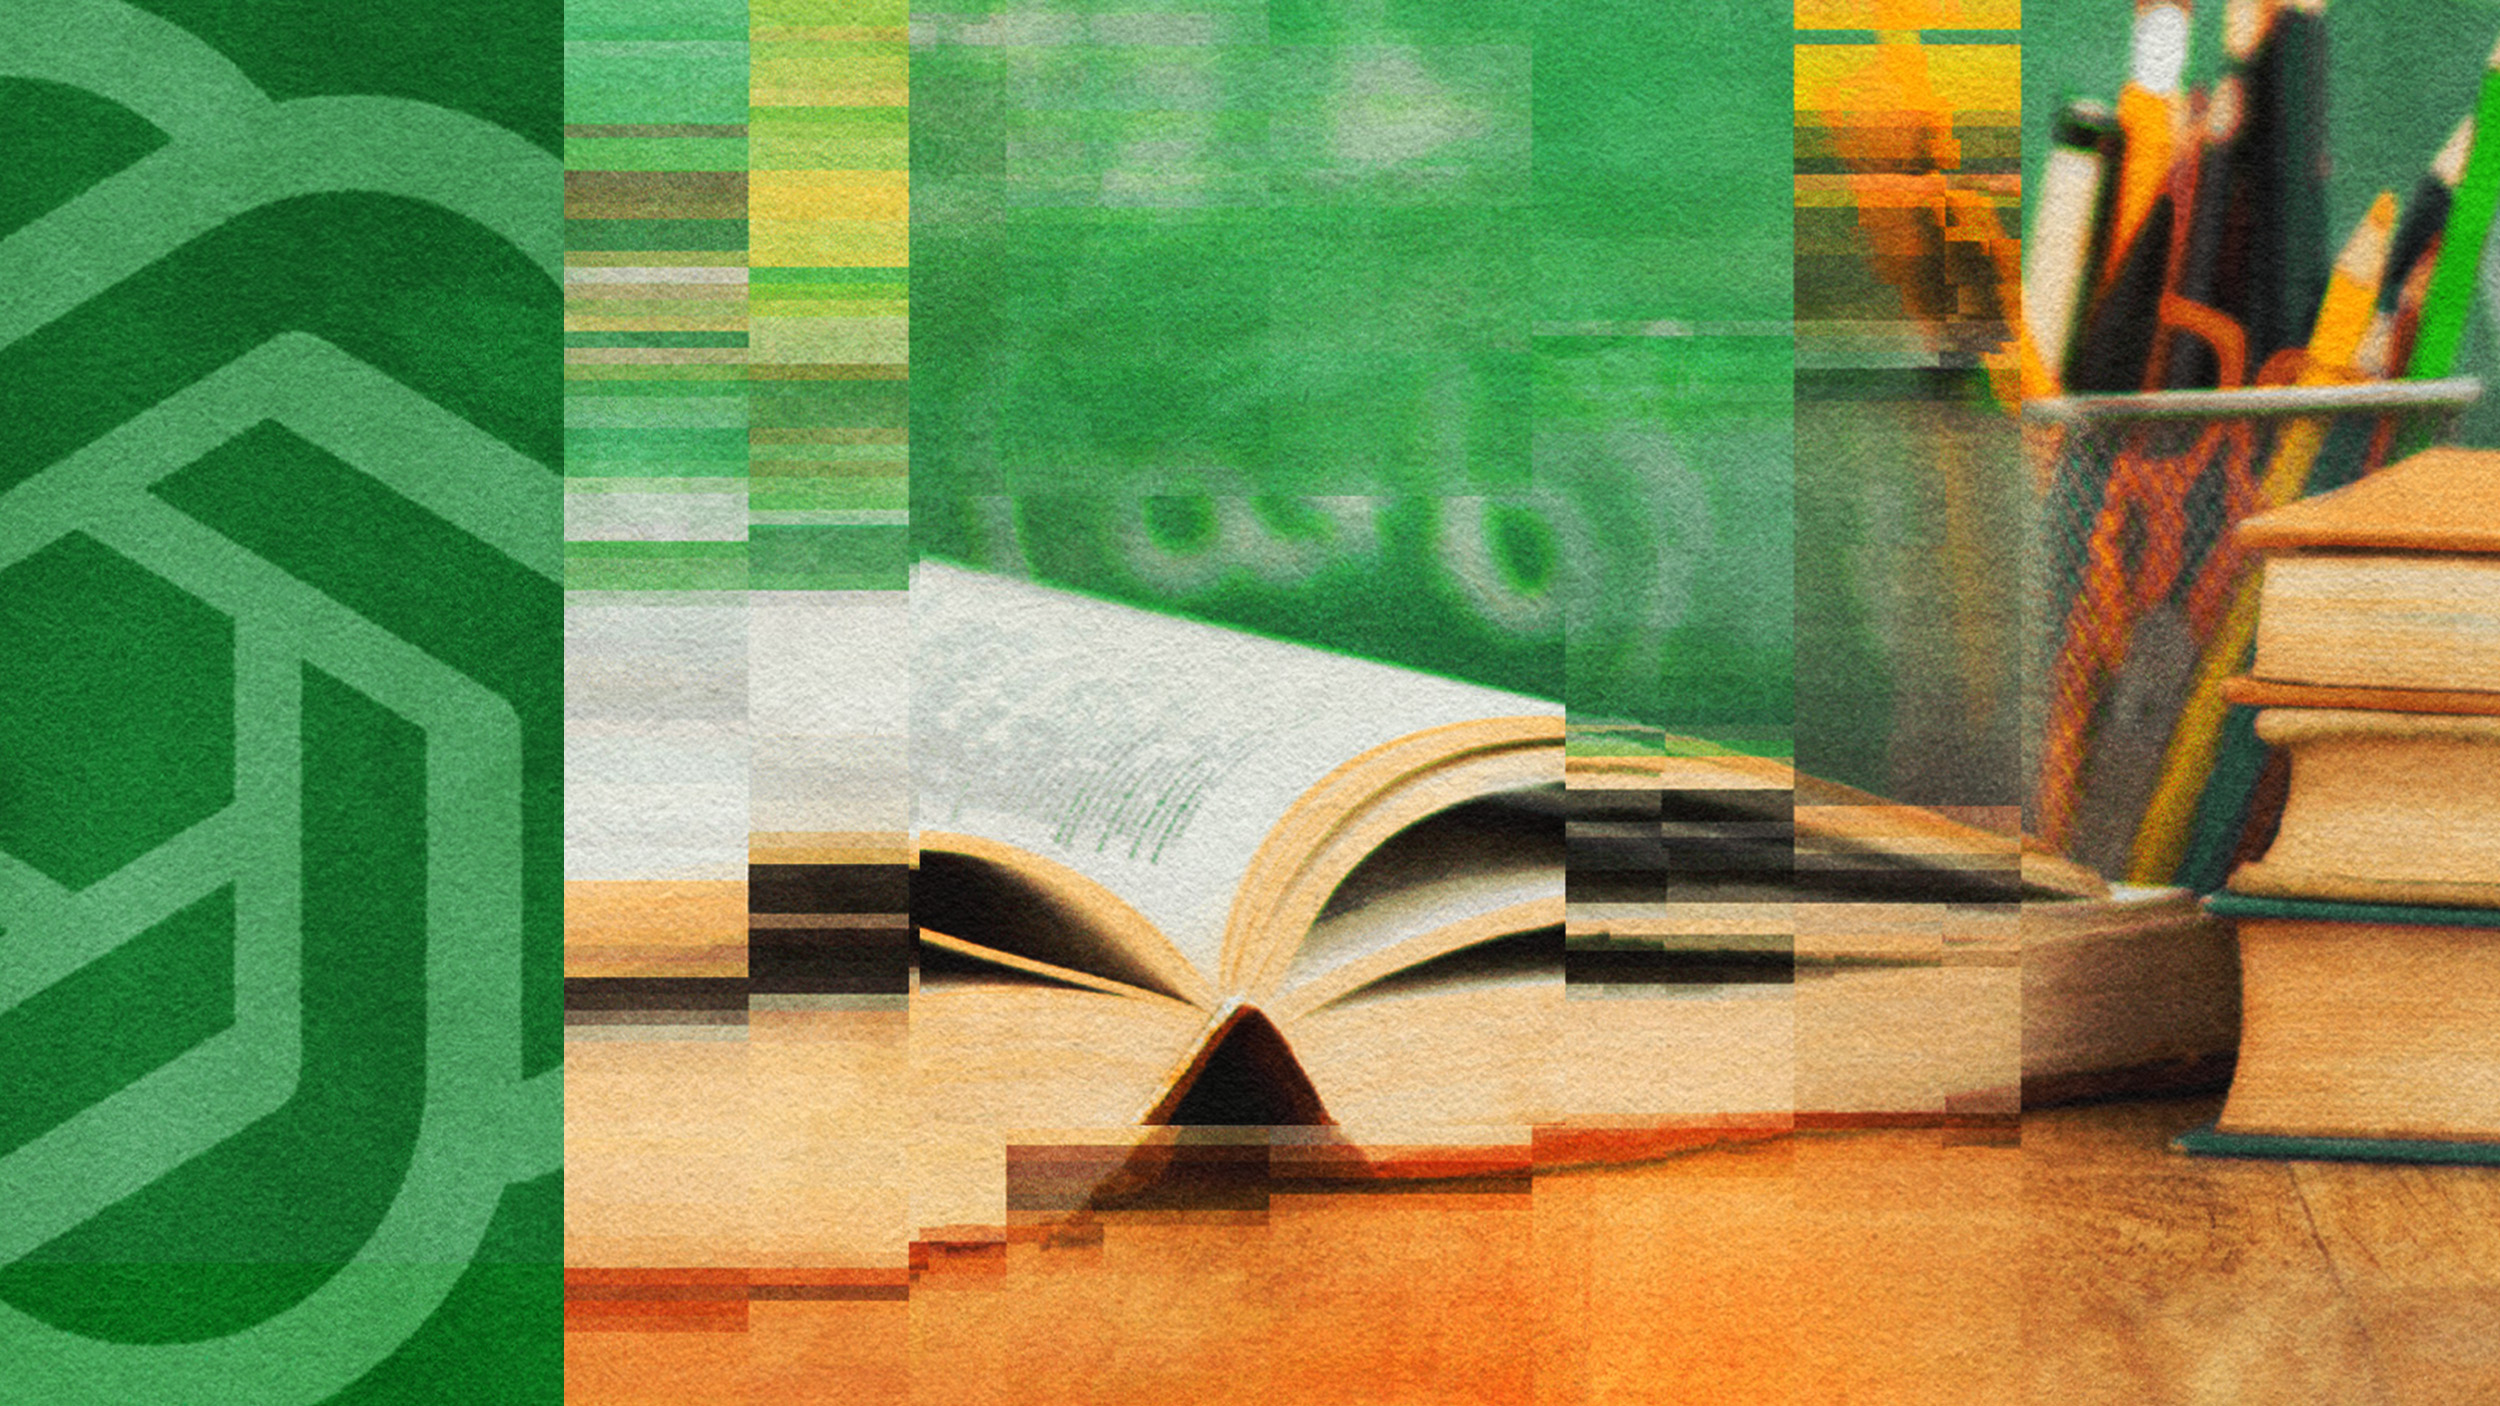 An open book is on a desk alongside stacked books and a pencil holder. The image has been digitally distorted with pixelation and a green overlay featuring a partial logo.